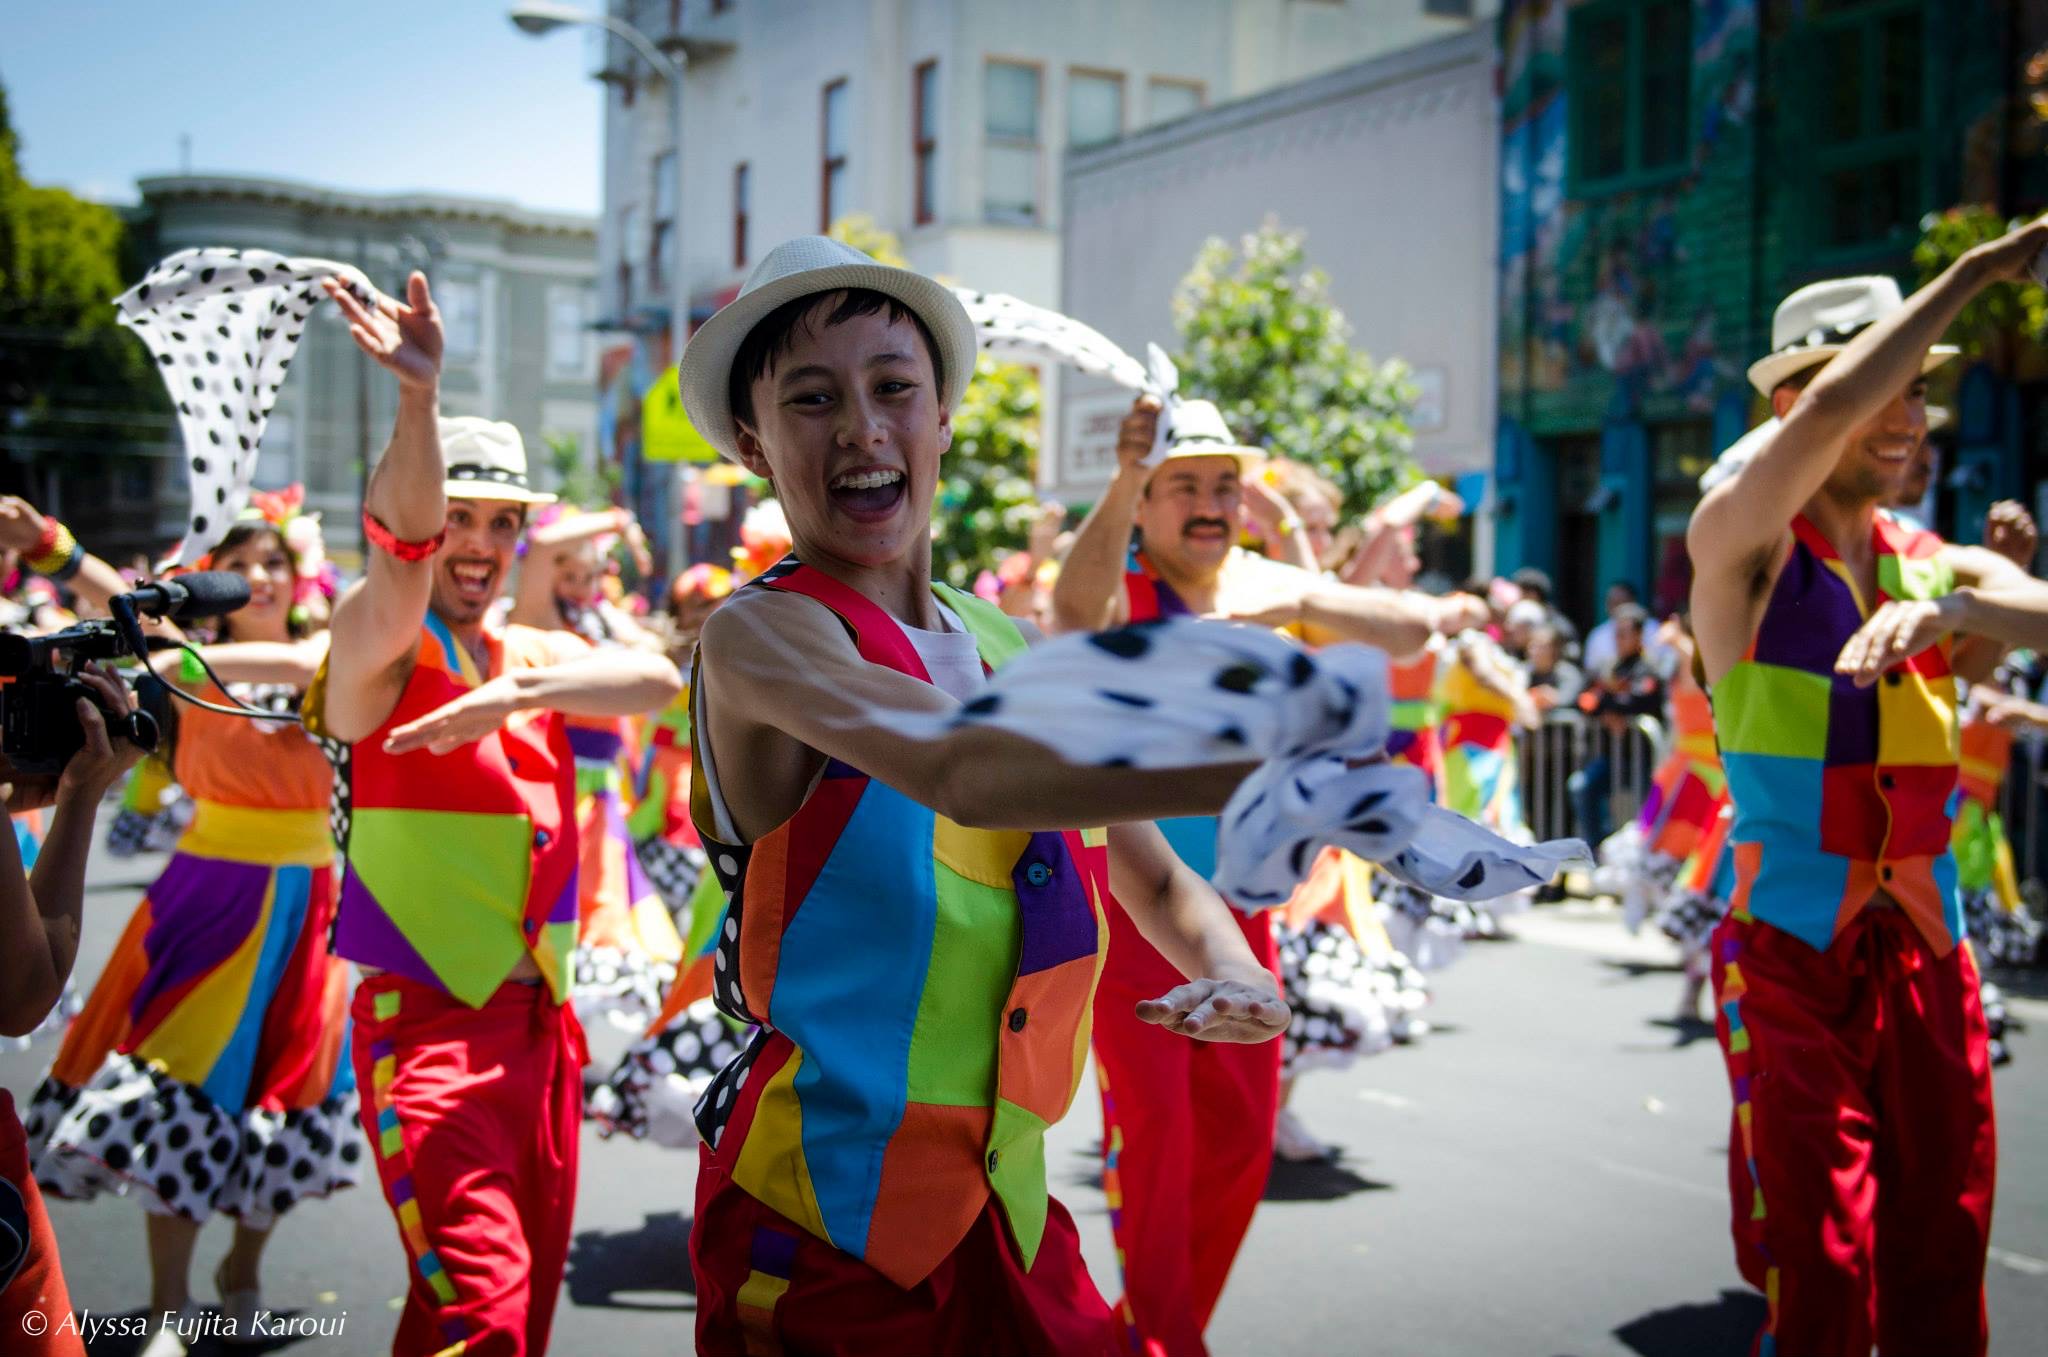 Noah dressed in bright colors in a parade